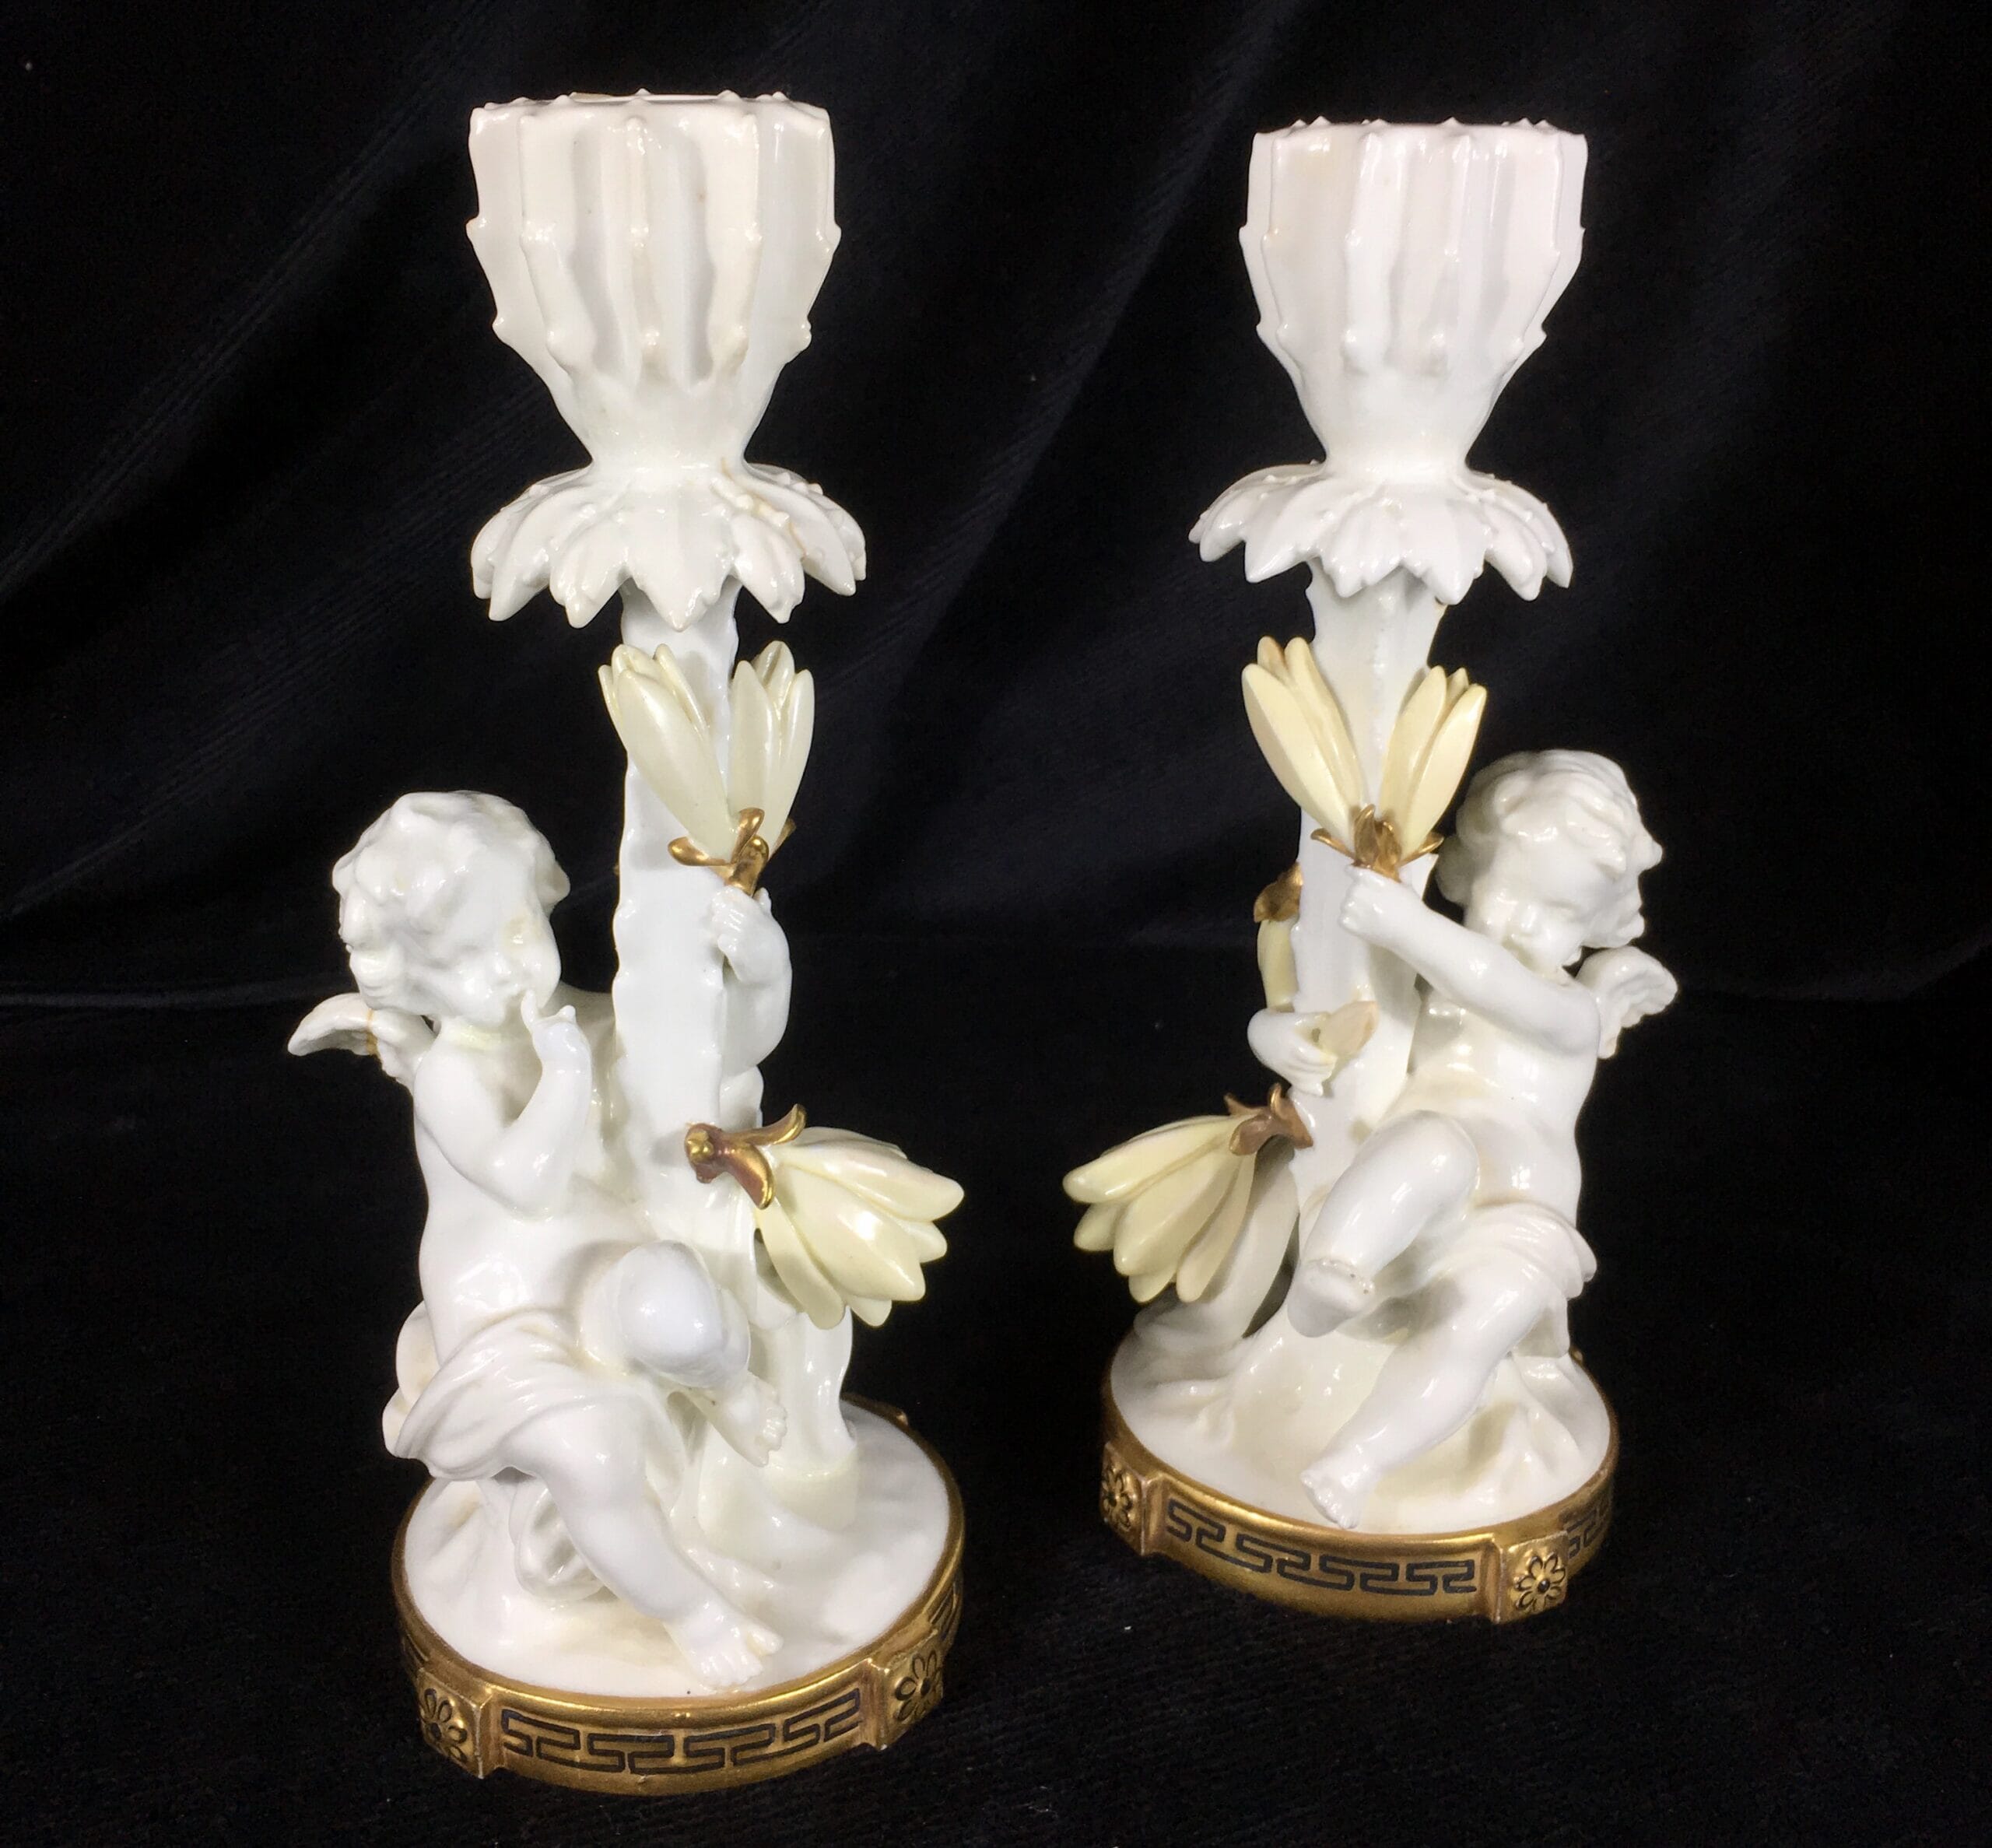 Pair of Moore Brothers candlesticks with cherubs & cactus, c. 1885-0